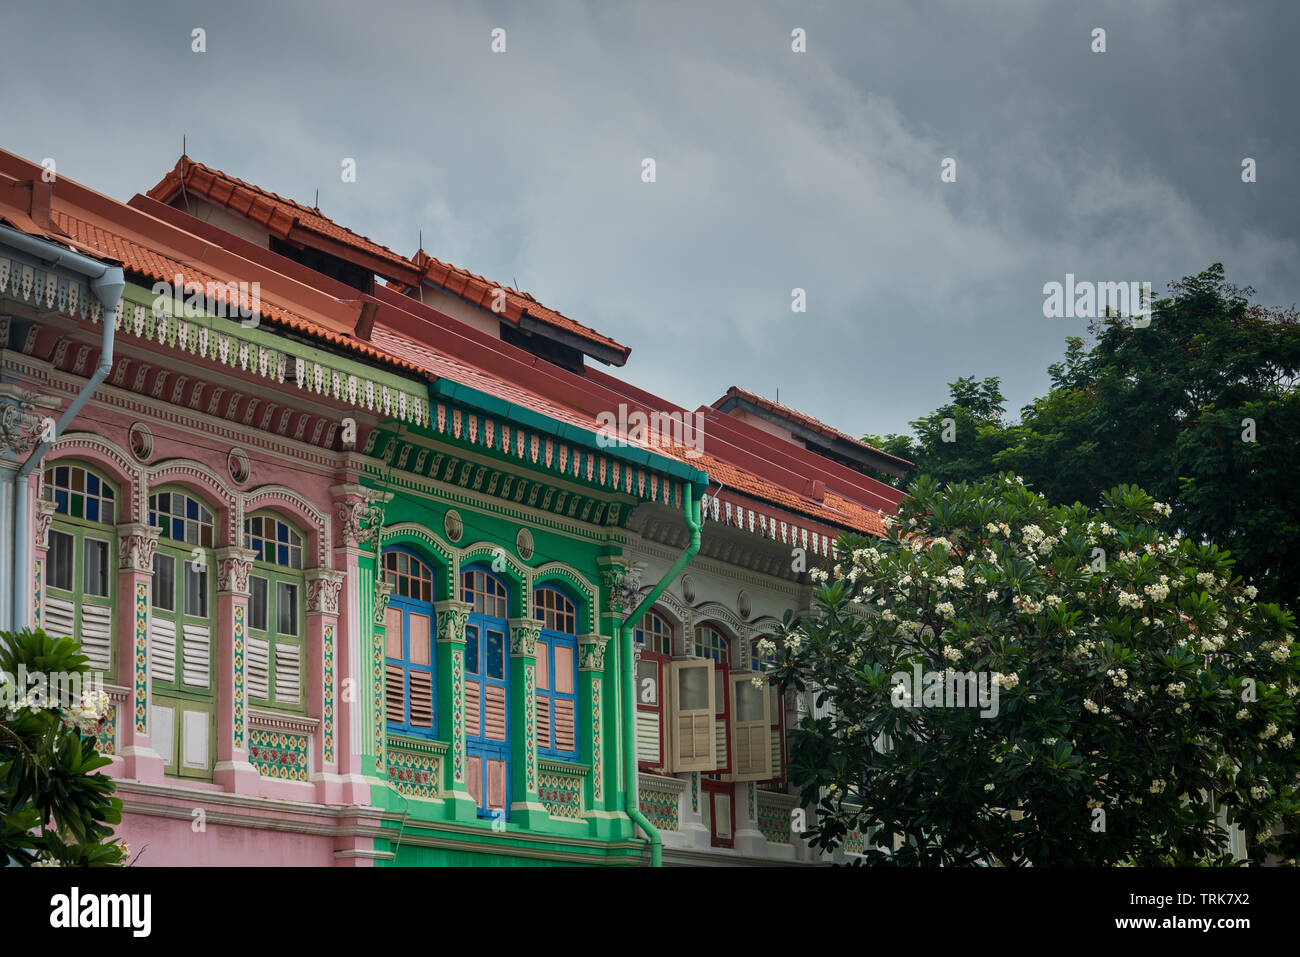 The Joo Chiat area of Singapore is well known for Peranakan style architecture and colourful shophouses. Stock Photo